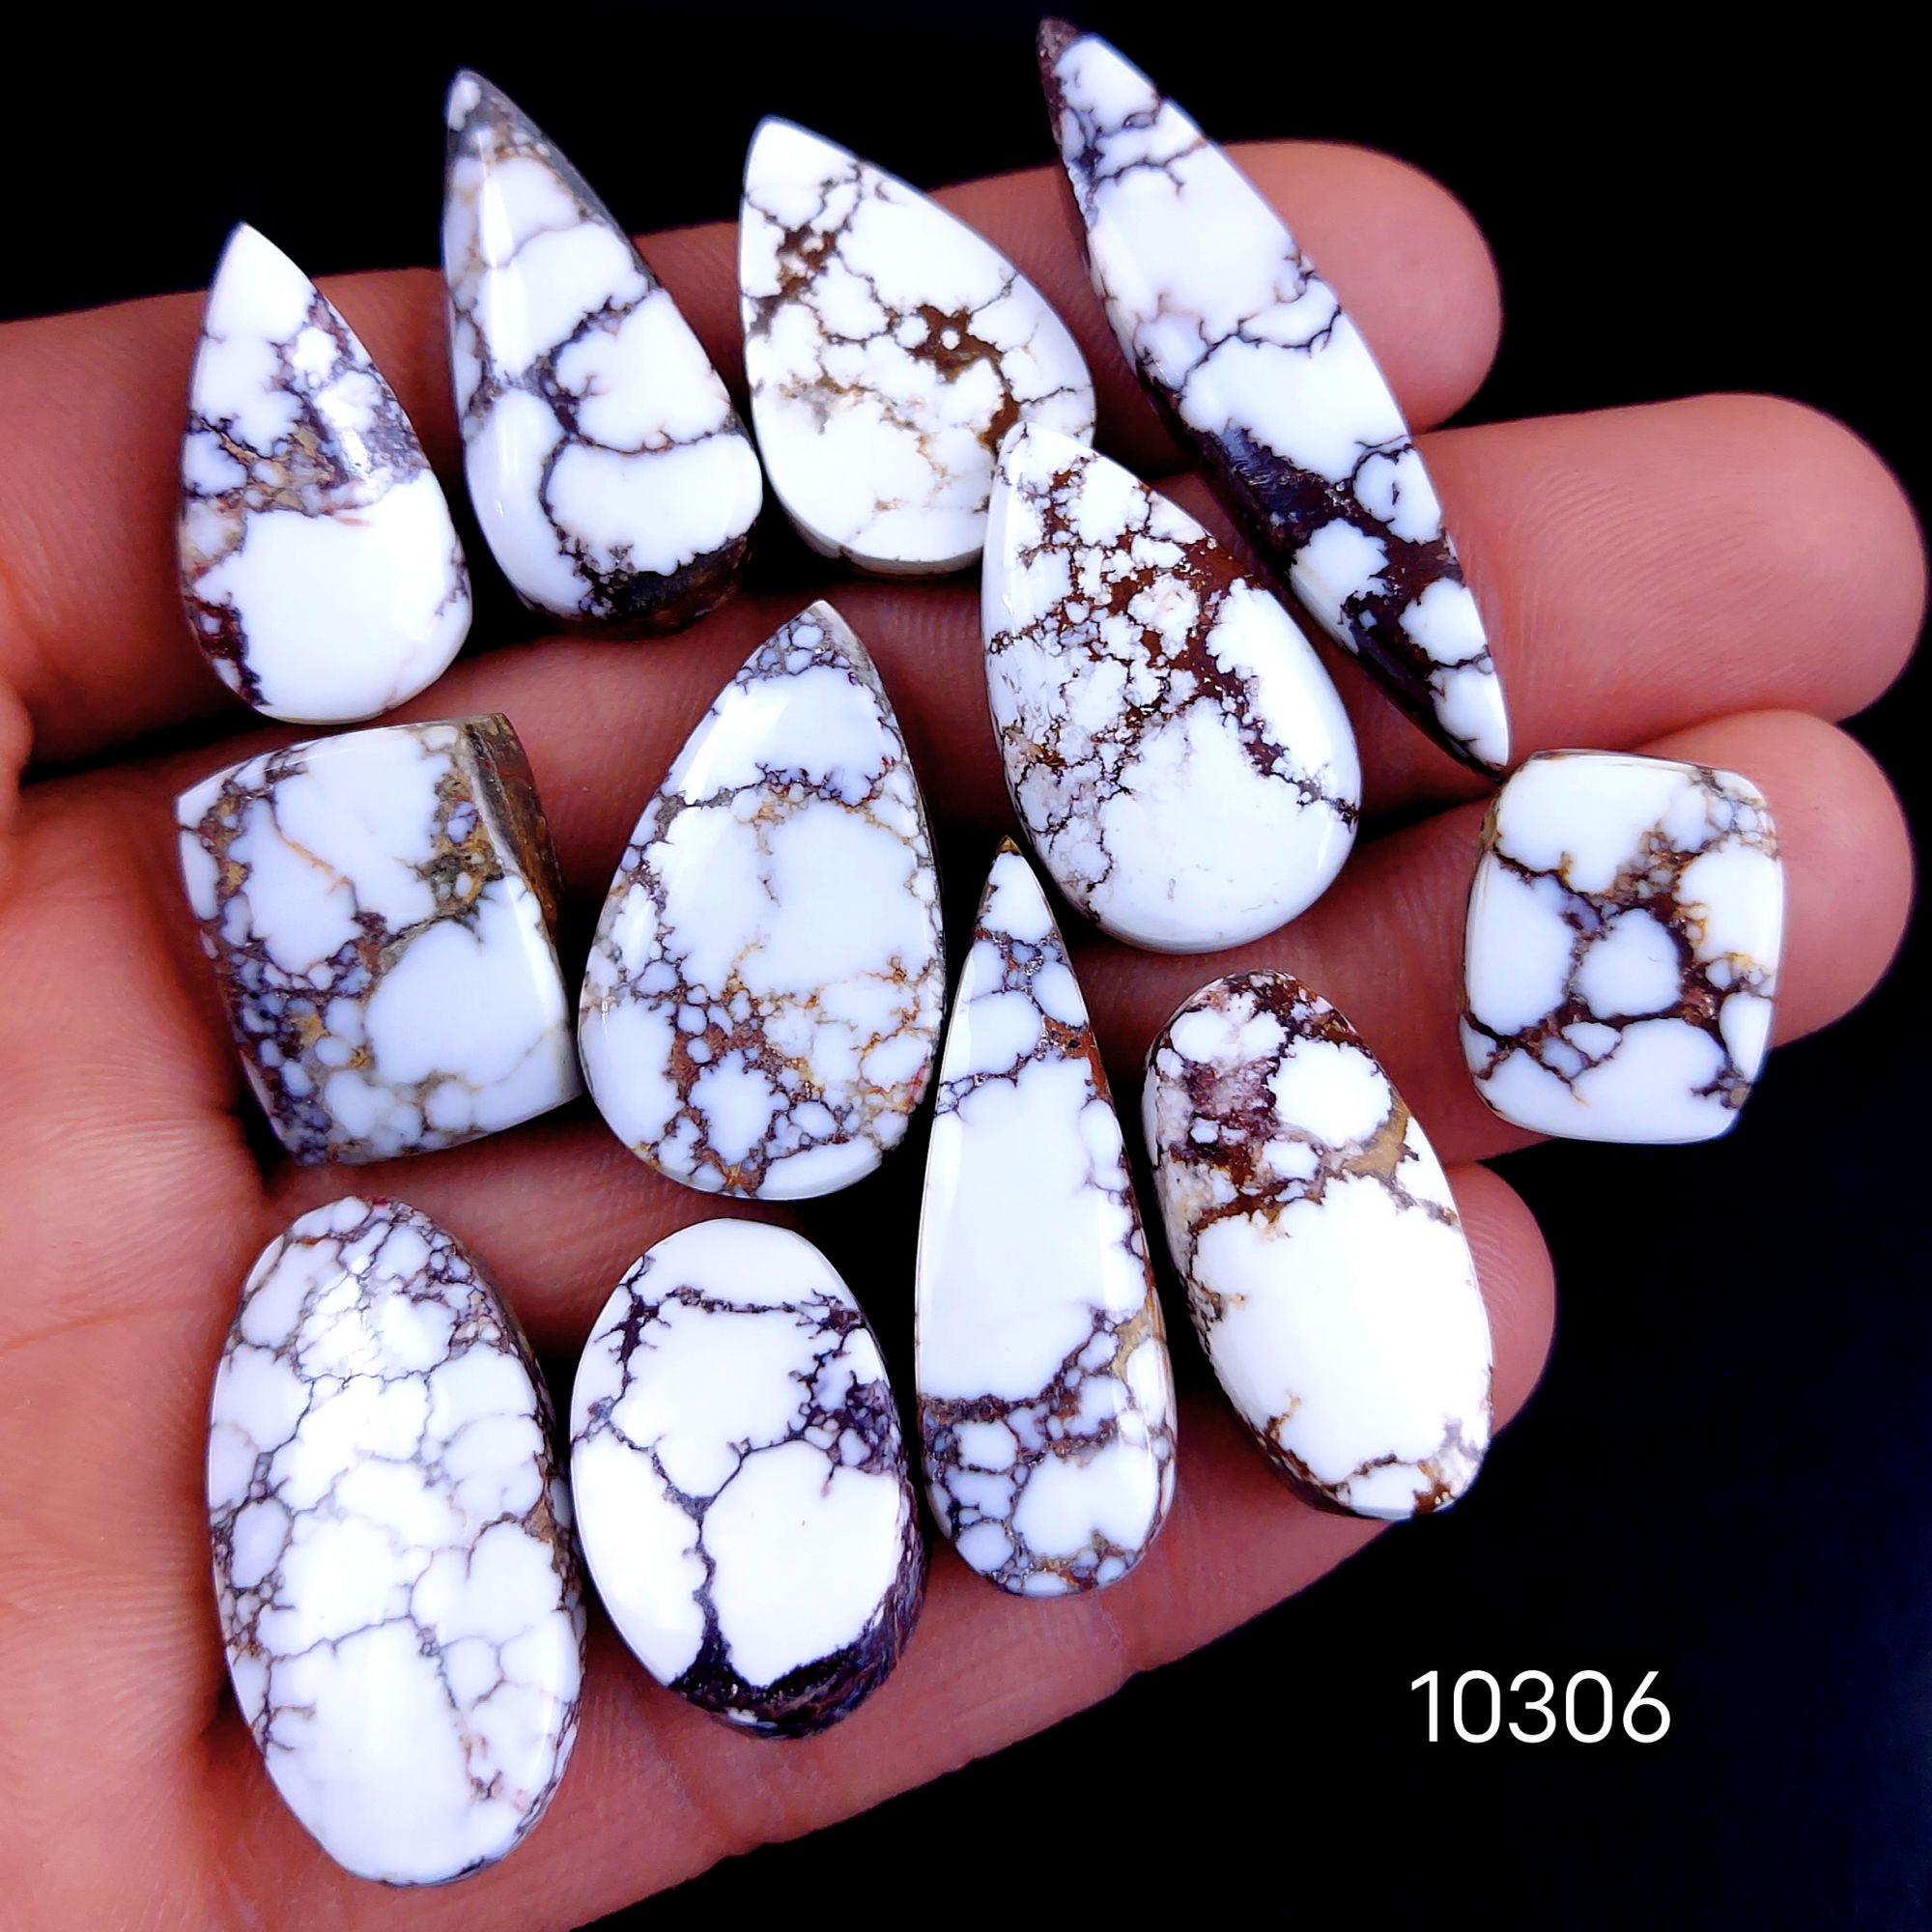 12Pc 195Cts Natural Wild Horse Magnesite Turquoise Cabochon Polished Loose Gemstone Flat Back Multi Jewelry Making Crystal  42x8 16x13mm #10306